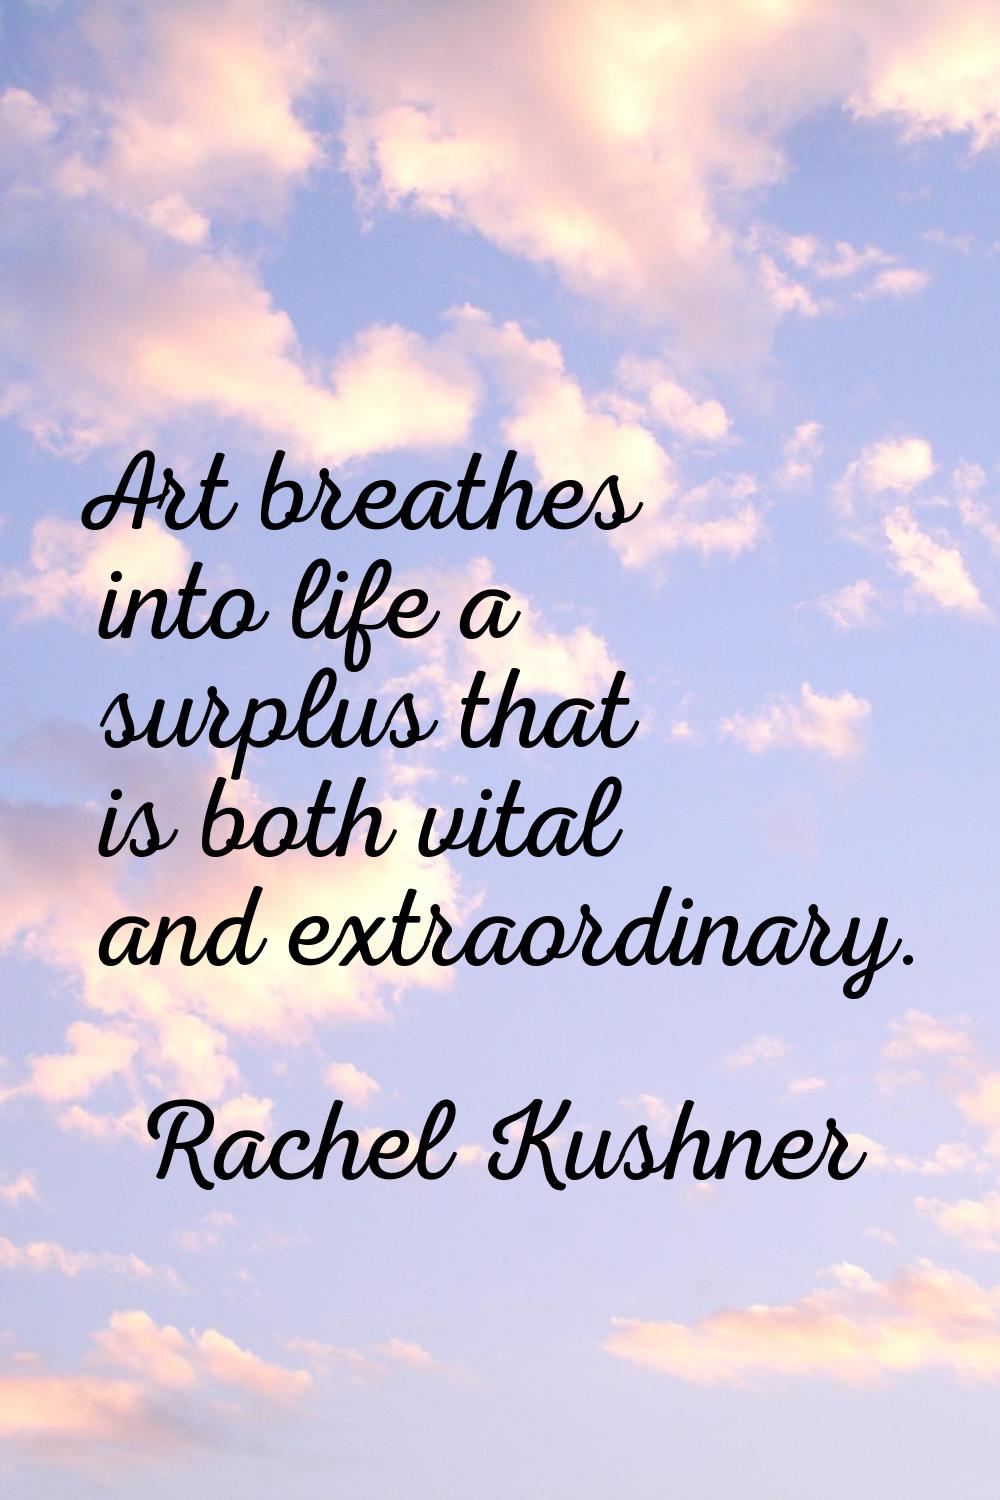 Art breathes into life a surplus that is both vital and extraordinary.